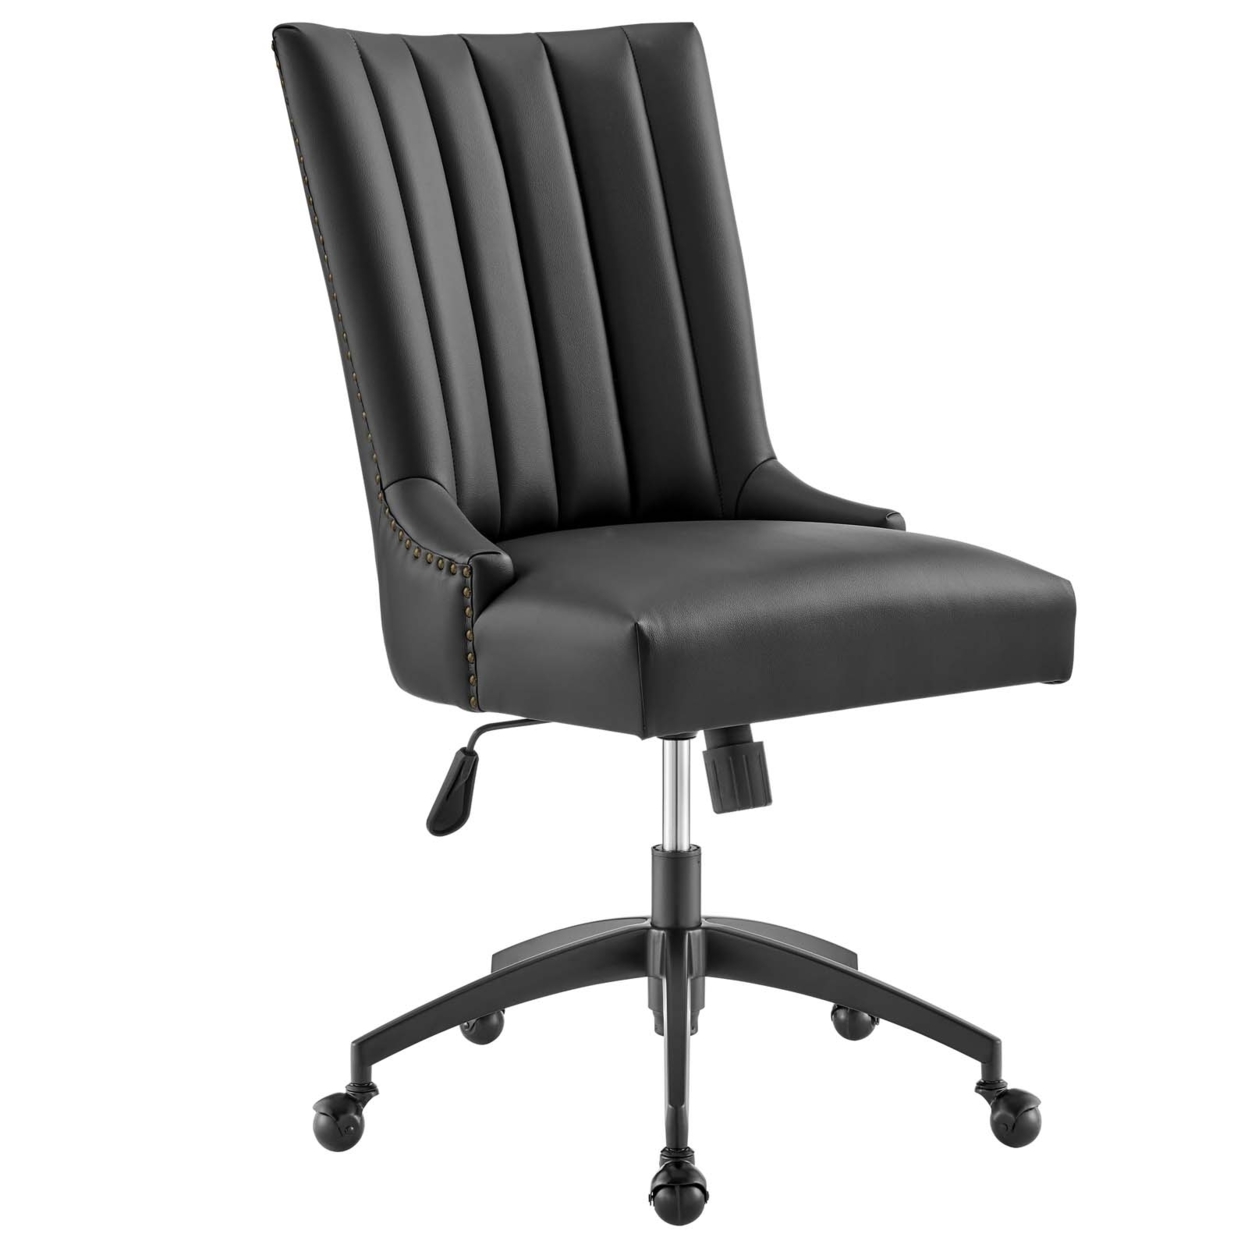 Empower Channel Tufted Vegan Leather Office Chair, Black Black